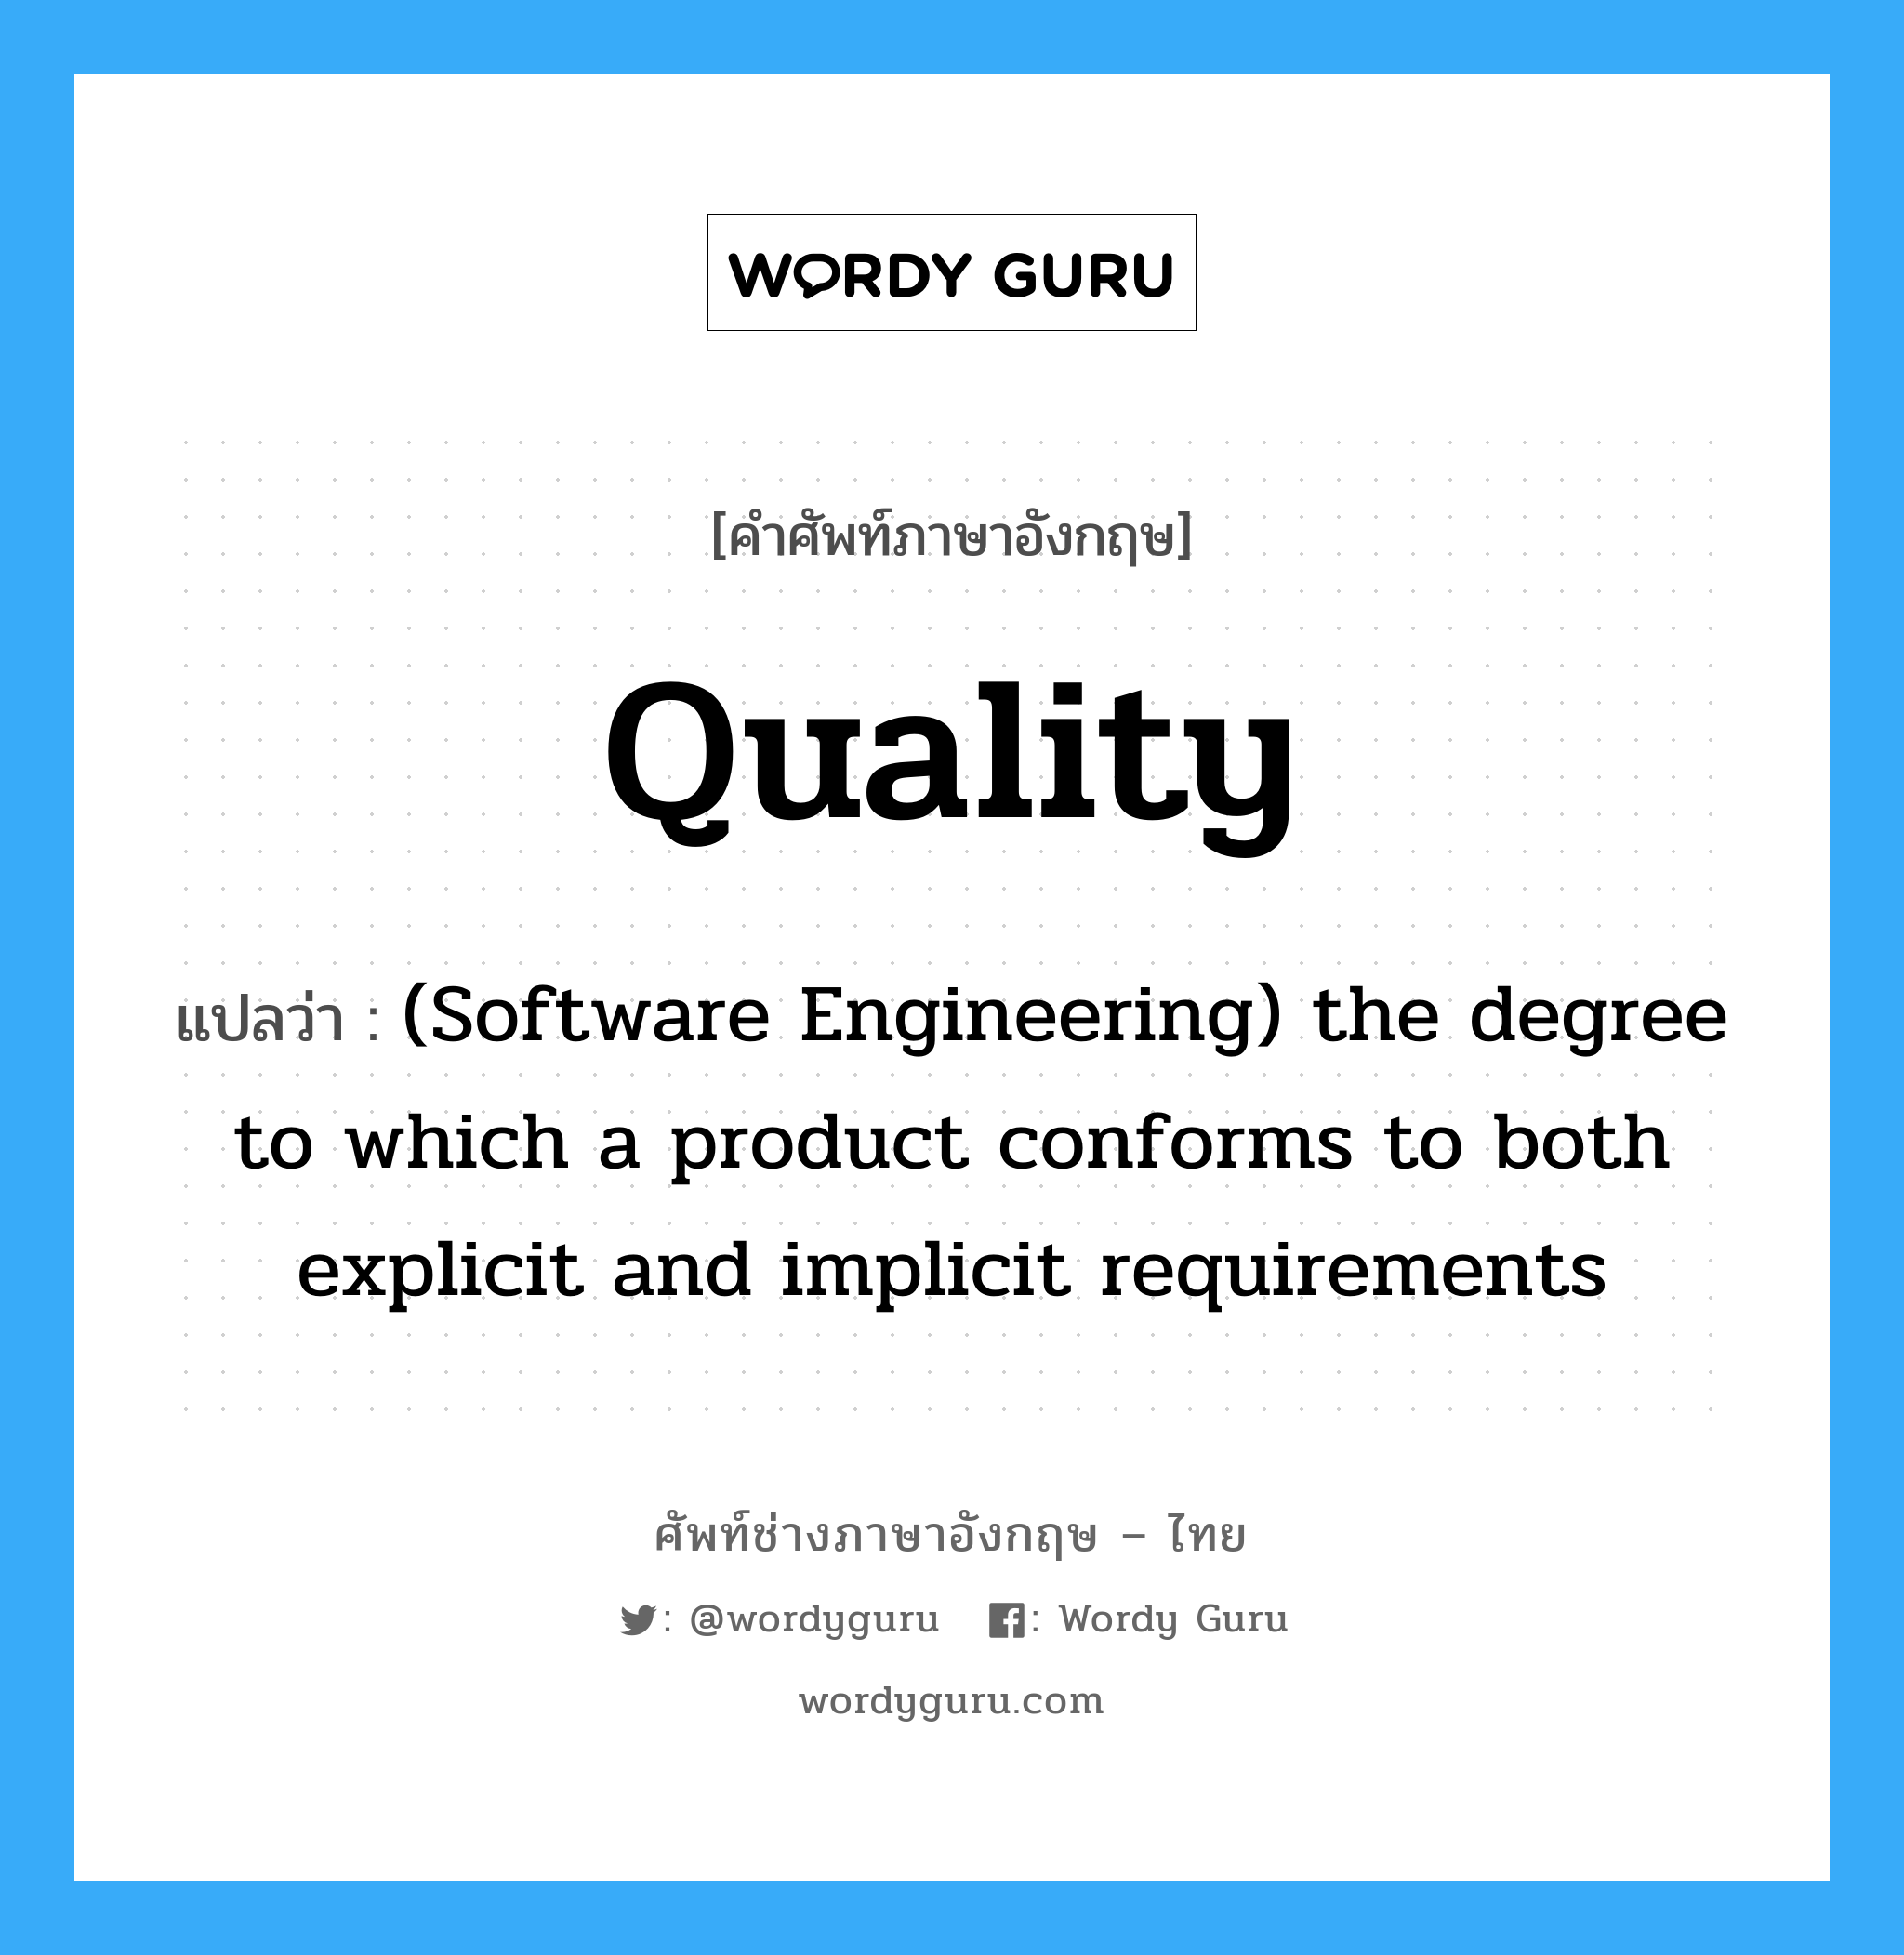 quality แปลว่า?, คำศัพท์ช่างภาษาอังกฤษ - ไทย Quality คำศัพท์ภาษาอังกฤษ Quality แปลว่า (Software Engineering) the degree to which a product conforms to both explicit and implicit requirements